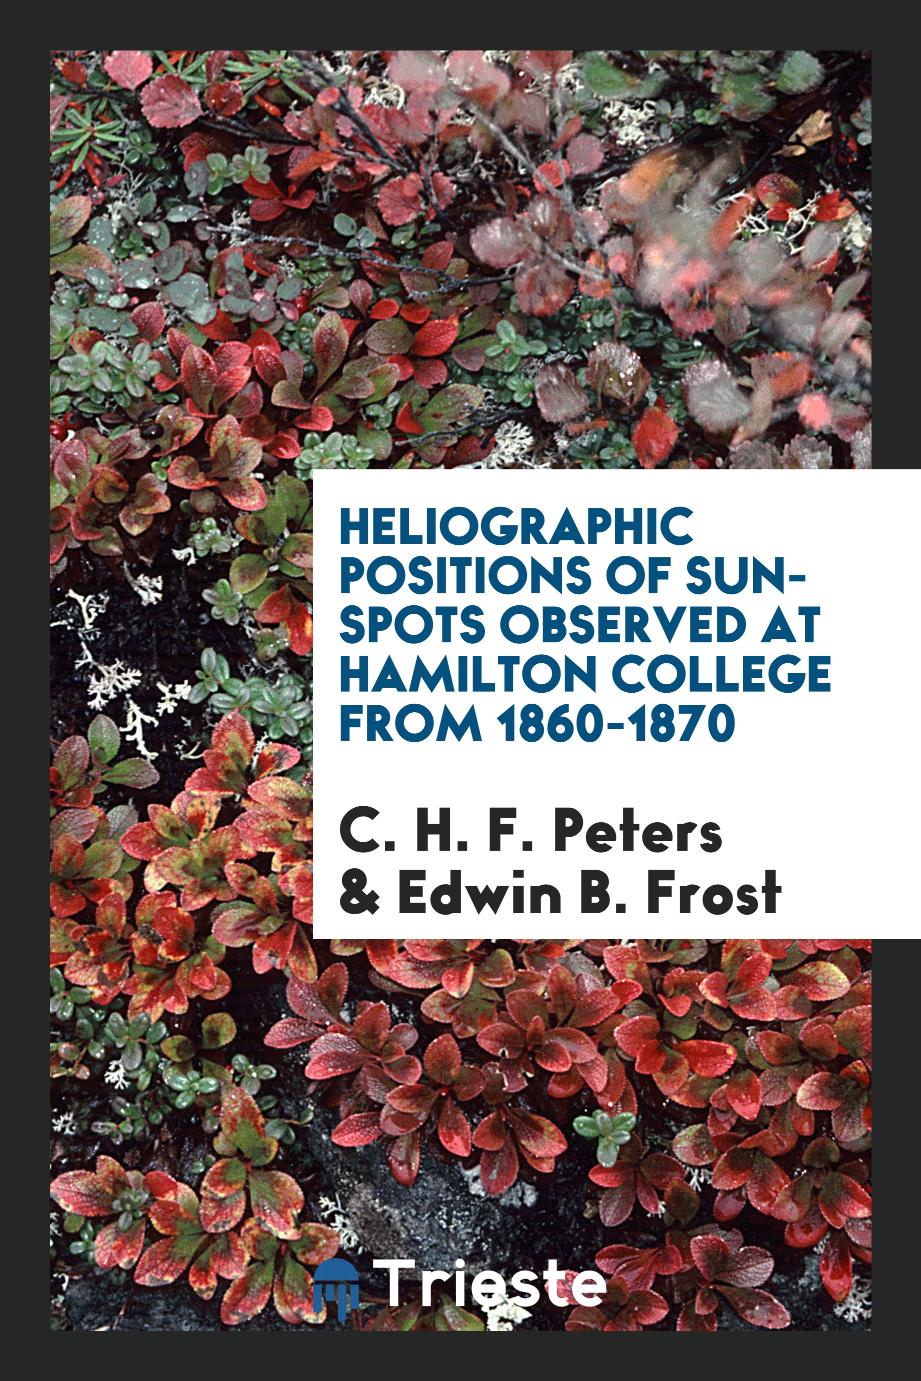 Heliographic positions of sun-spots observed at Hamilton College from 1860-1870